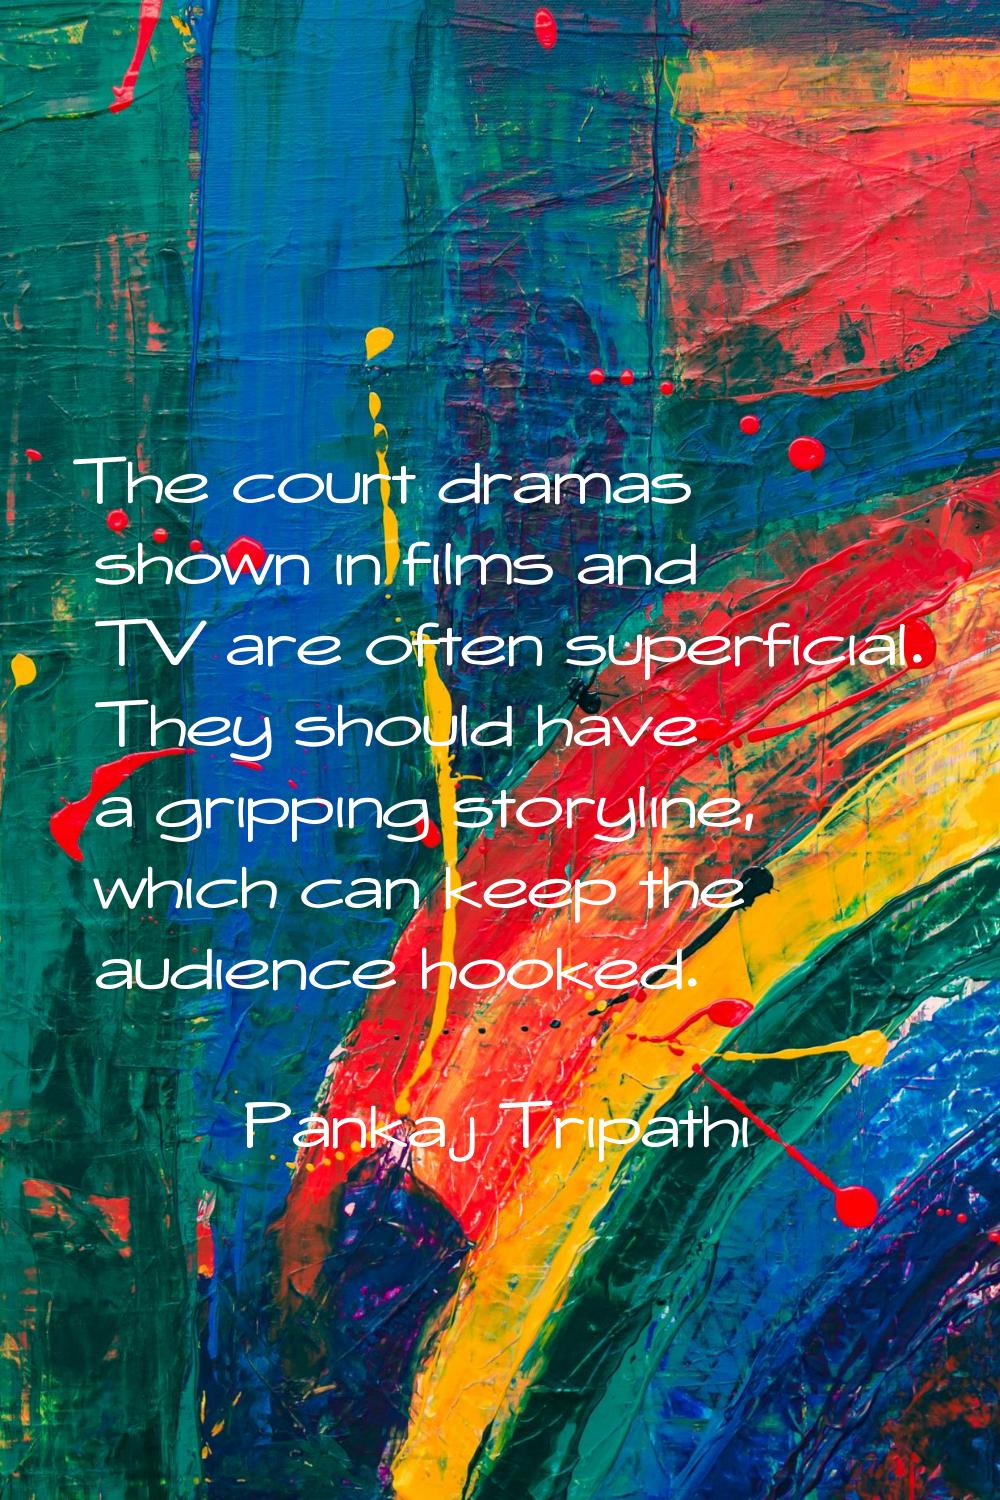 The court dramas shown in films and TV are often superficial. They should have a gripping storyline